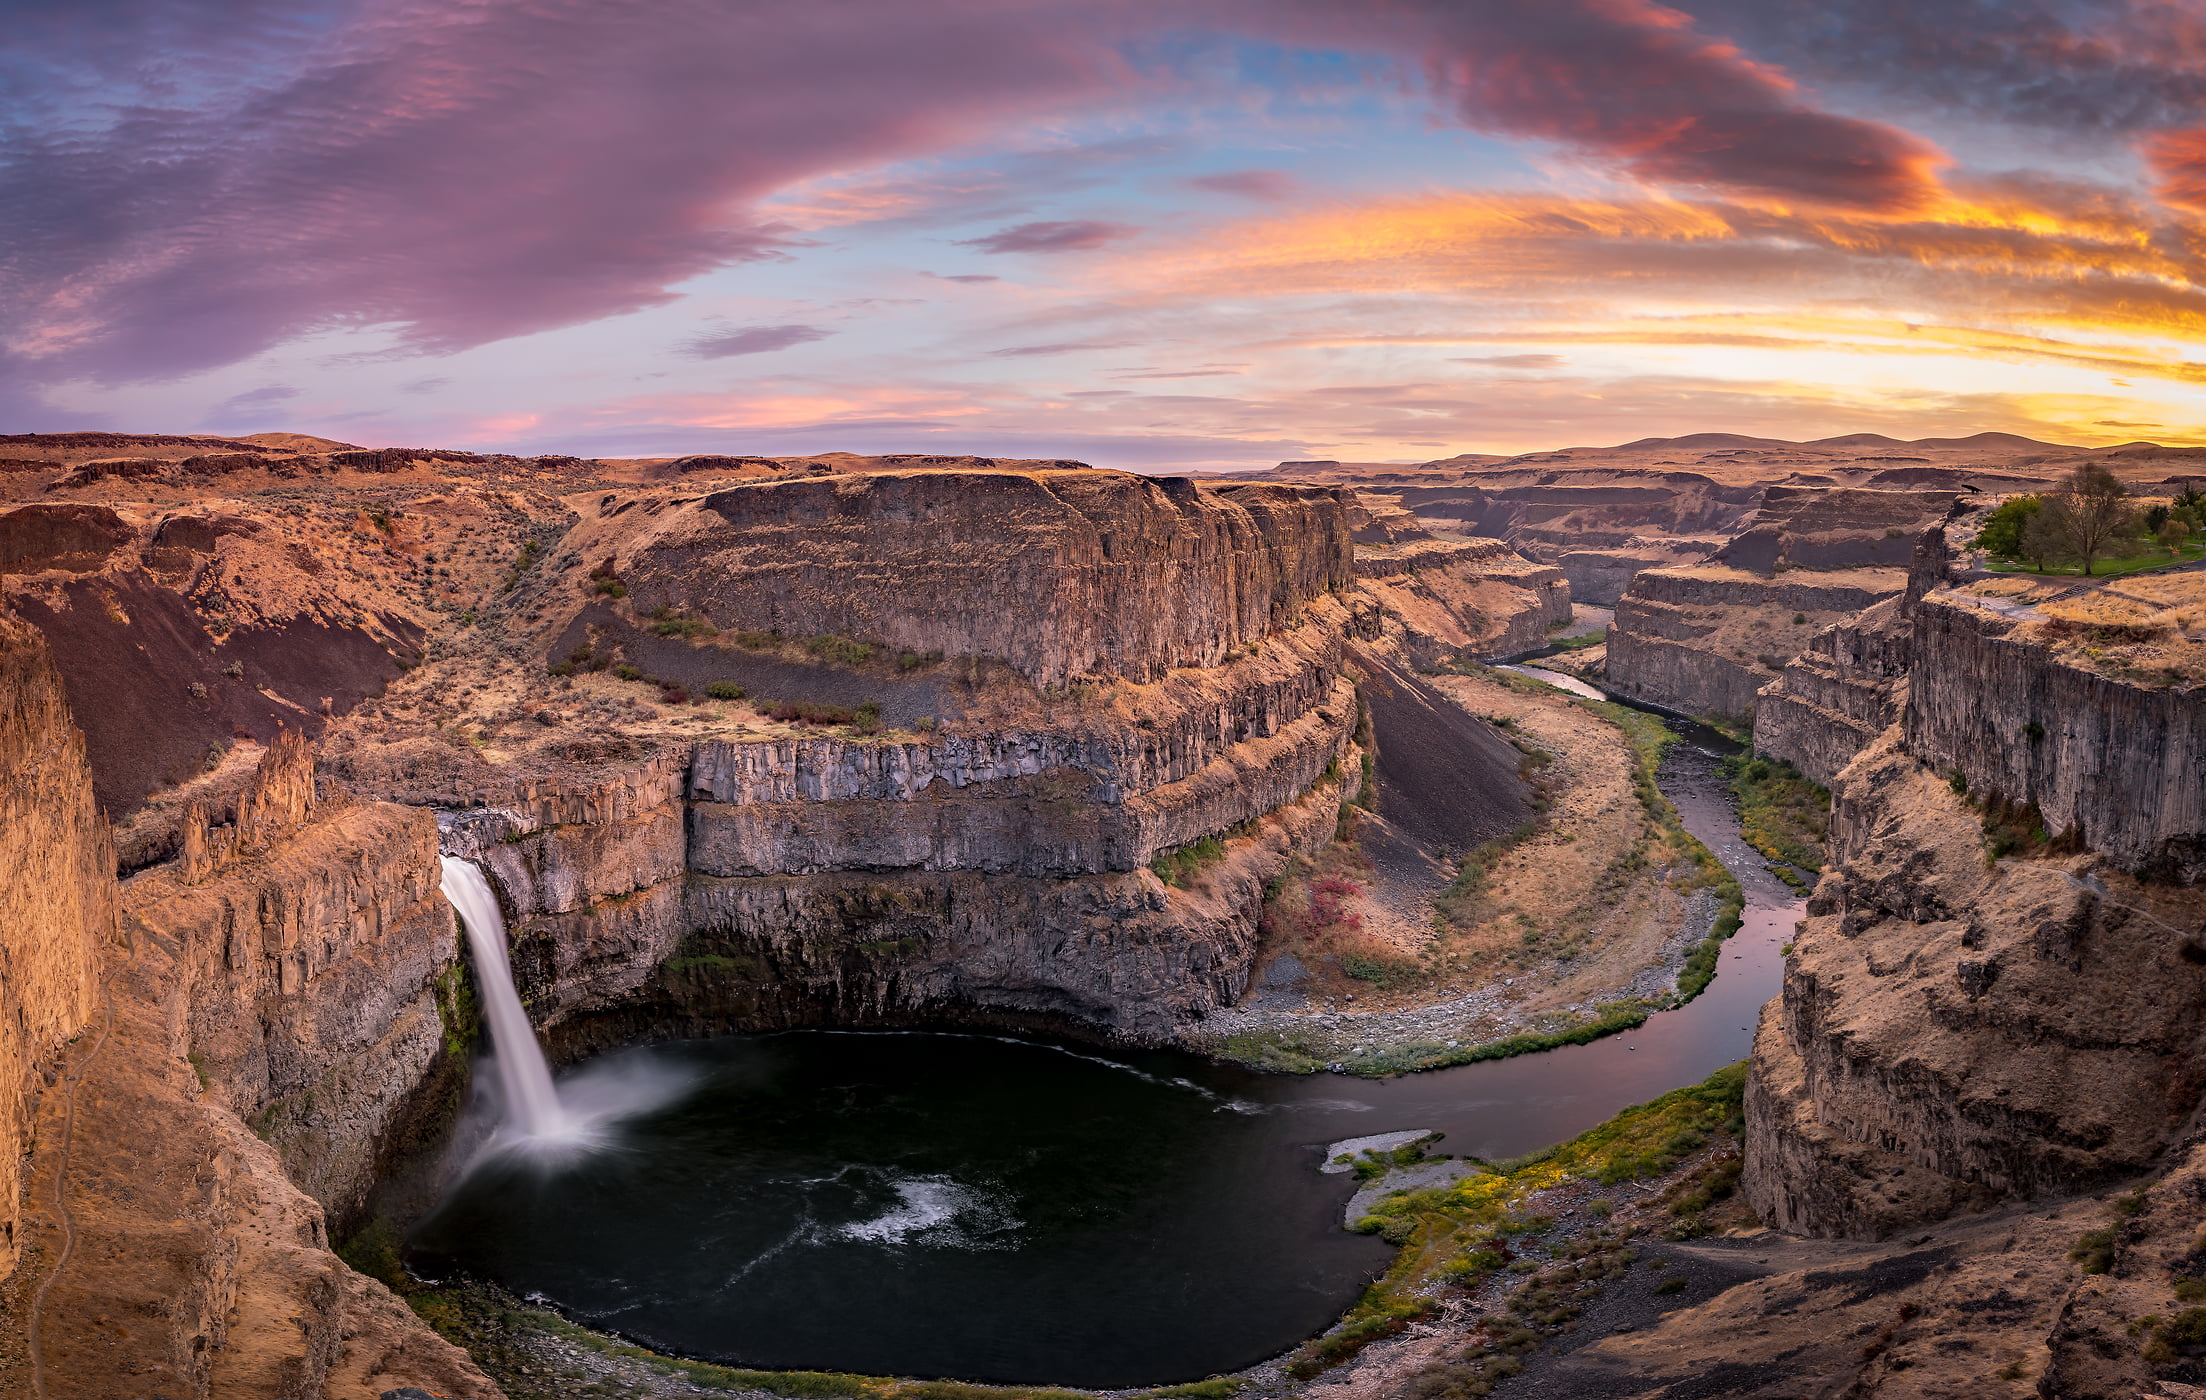 140 megapixels! A very high resolution, large-format VAST photo print of a canyon with a waterfall; landscape photograph created by Justin Katz in Palouse Falls, Washington